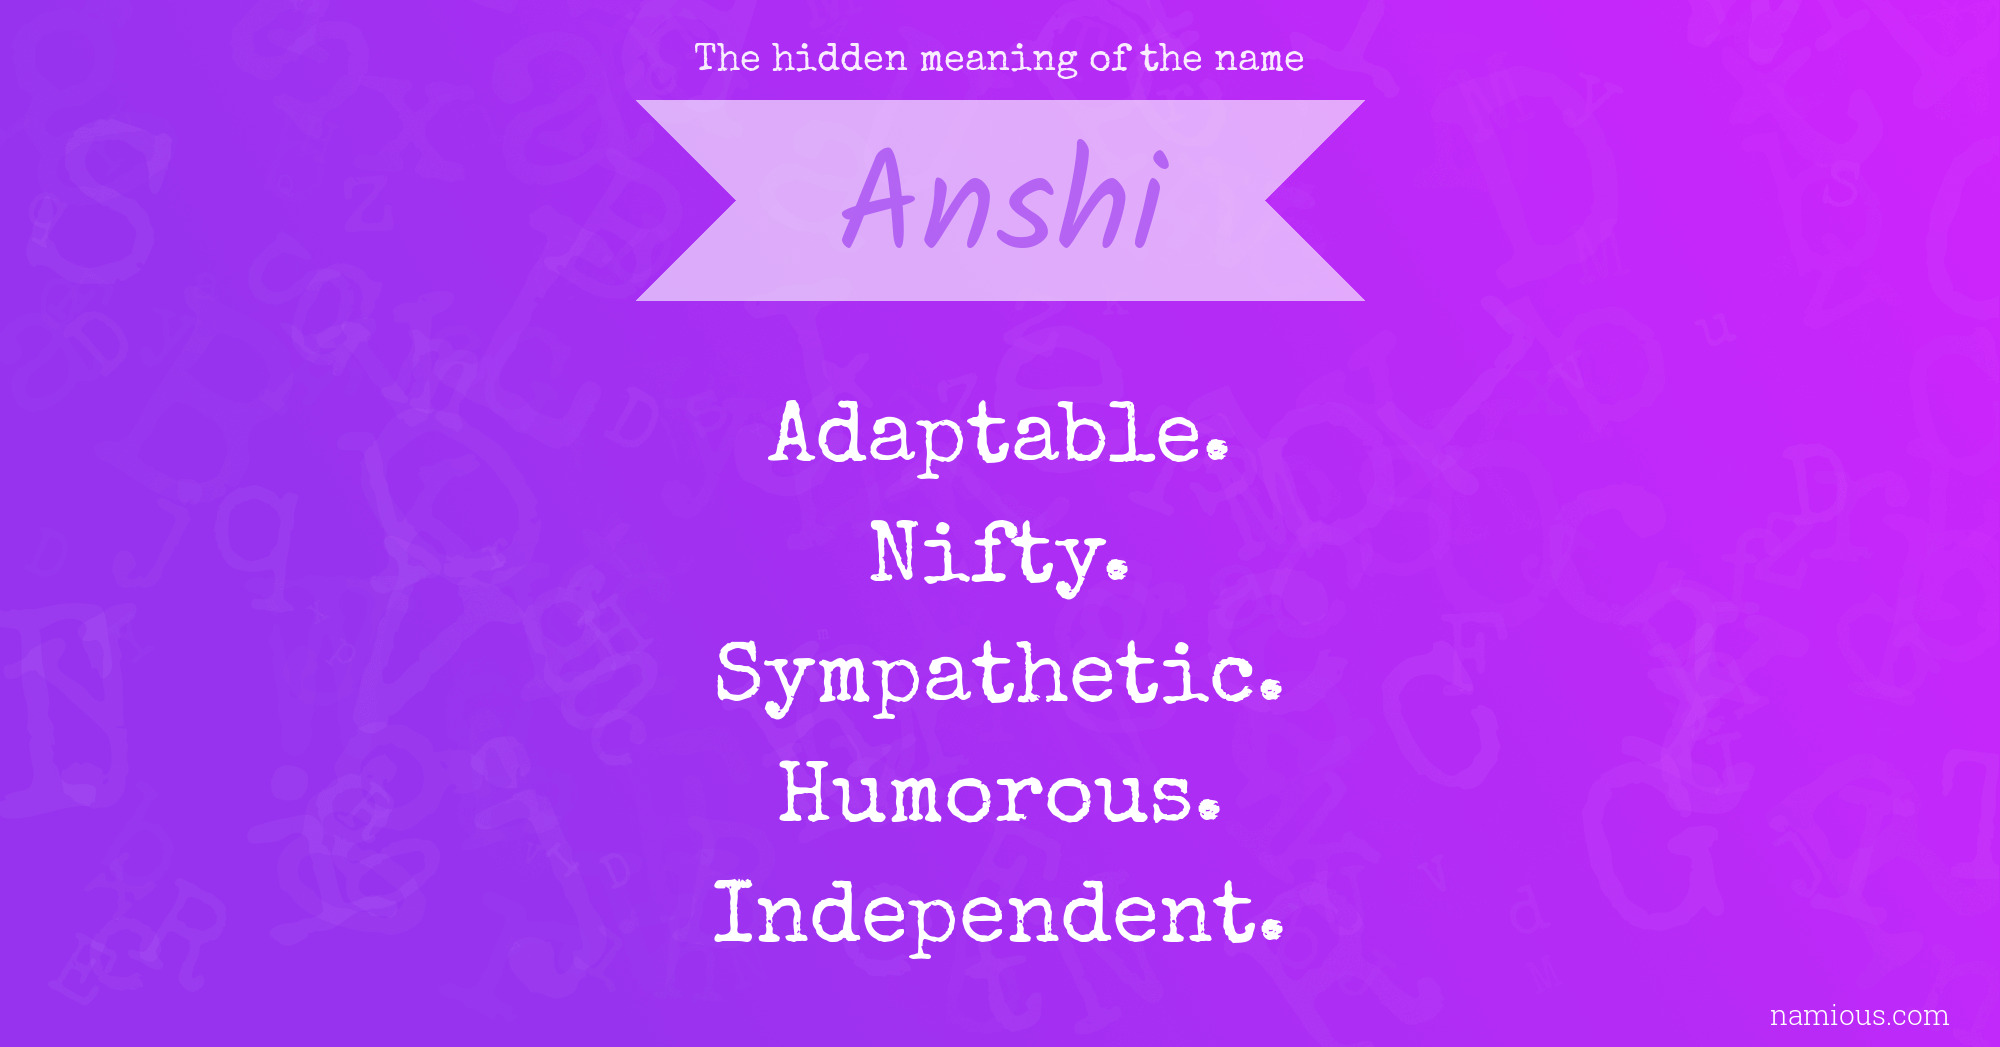 The hidden meaning of the name Anshi